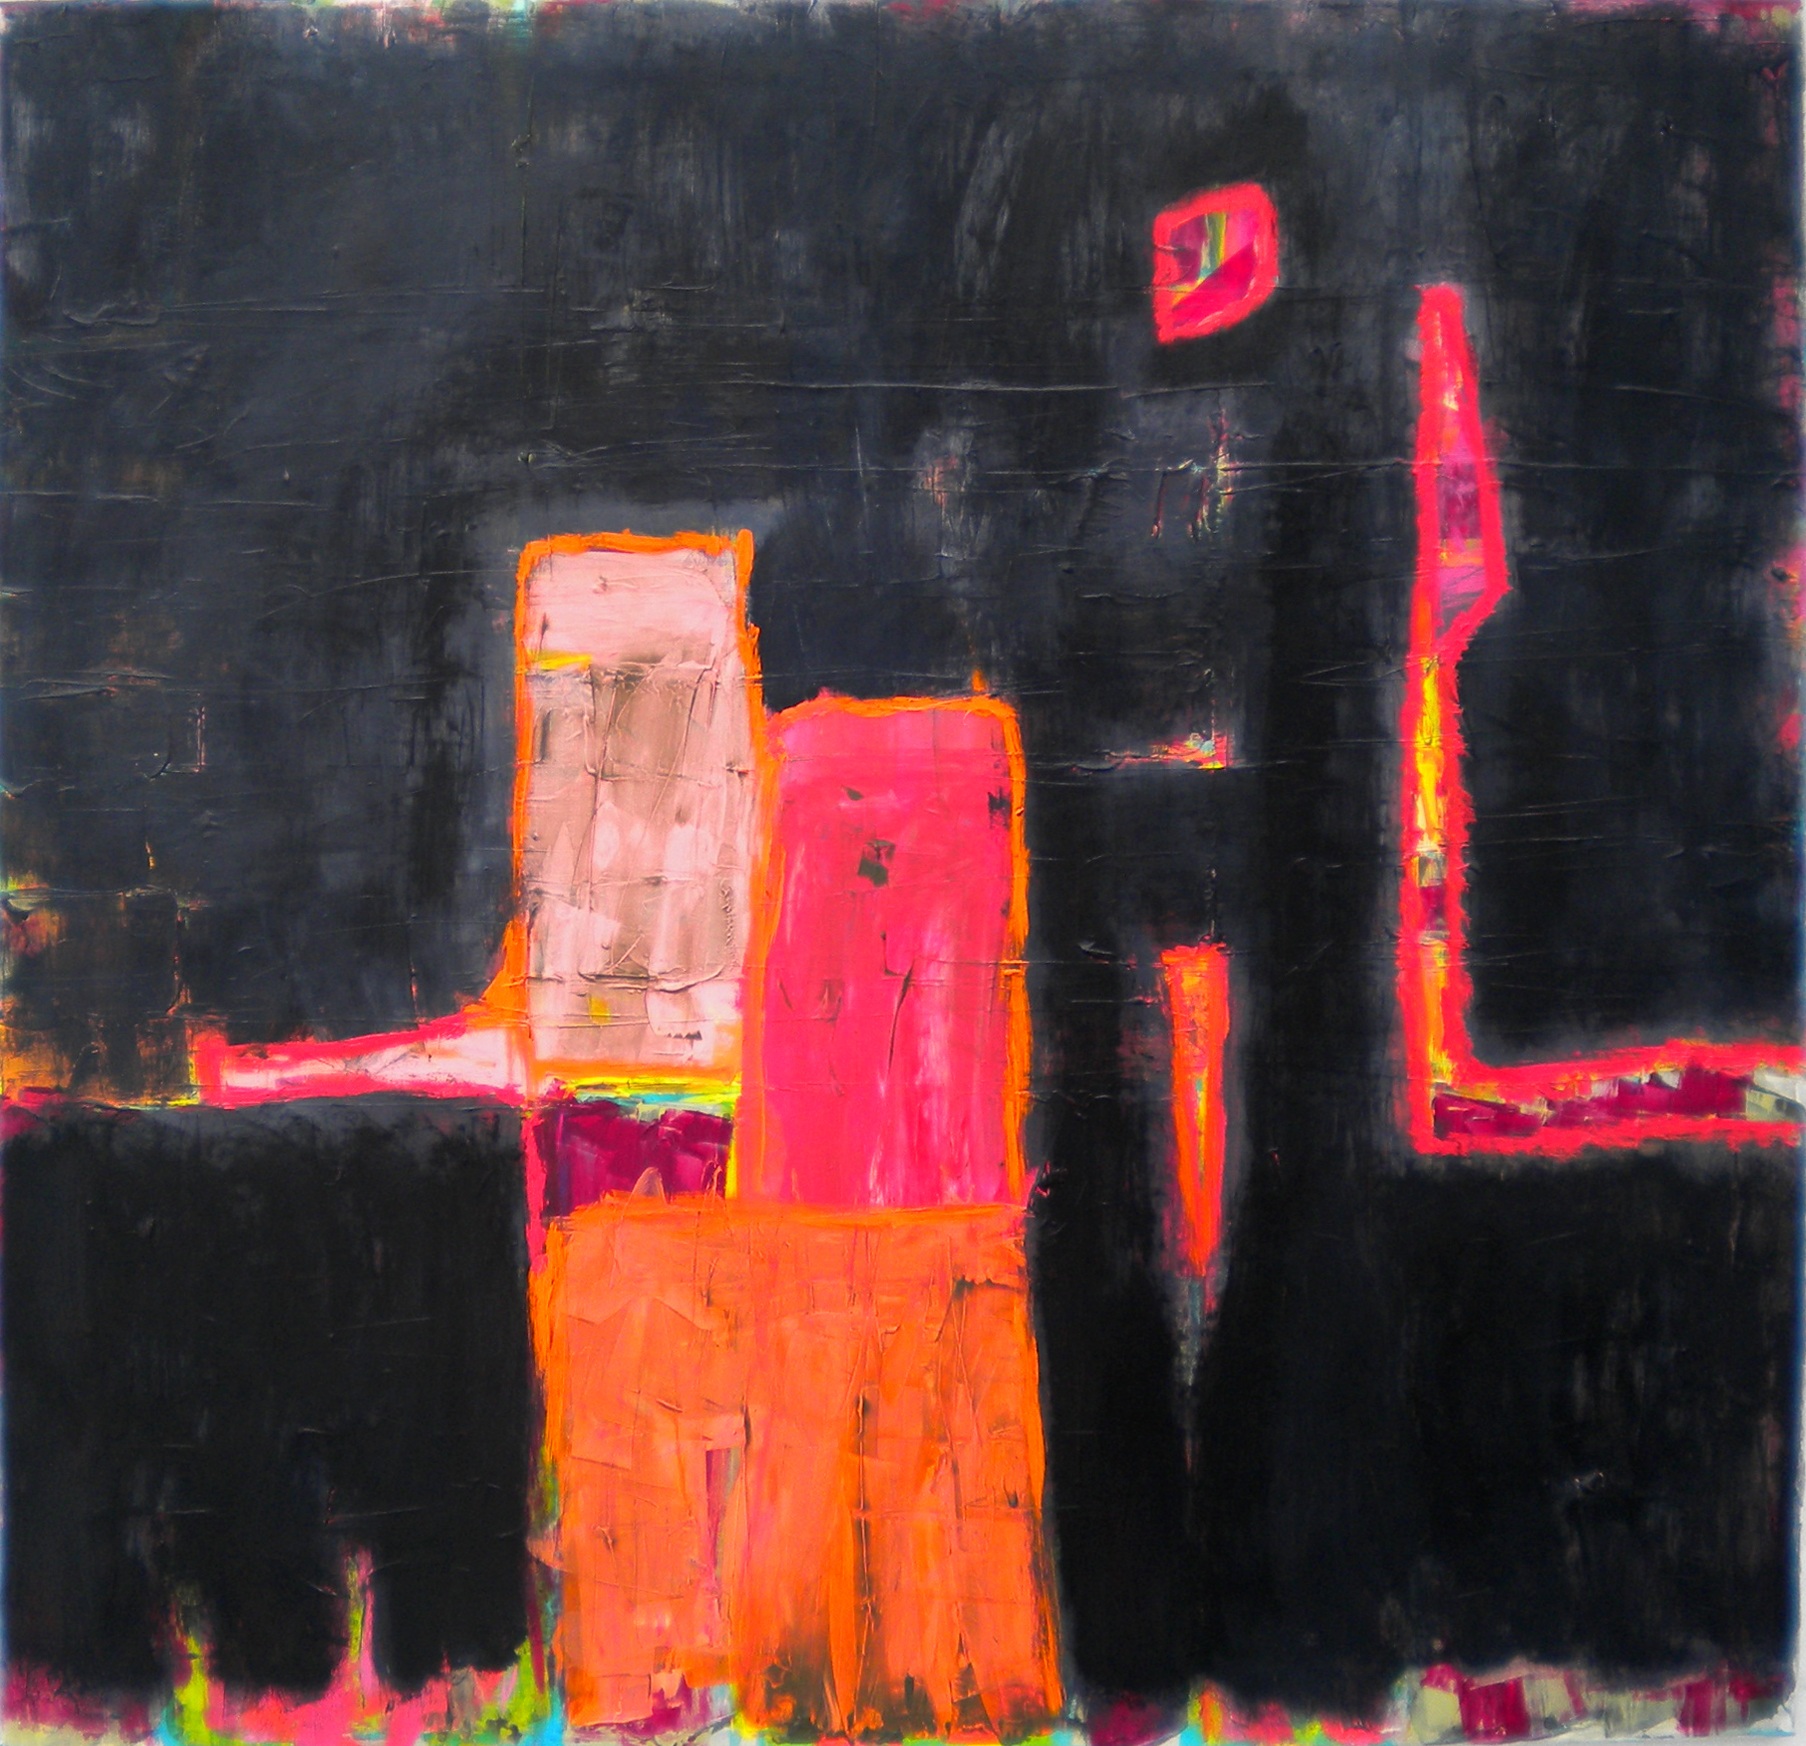 Acrylic on canvas: 80 x 80 cm. Title: Night in New York